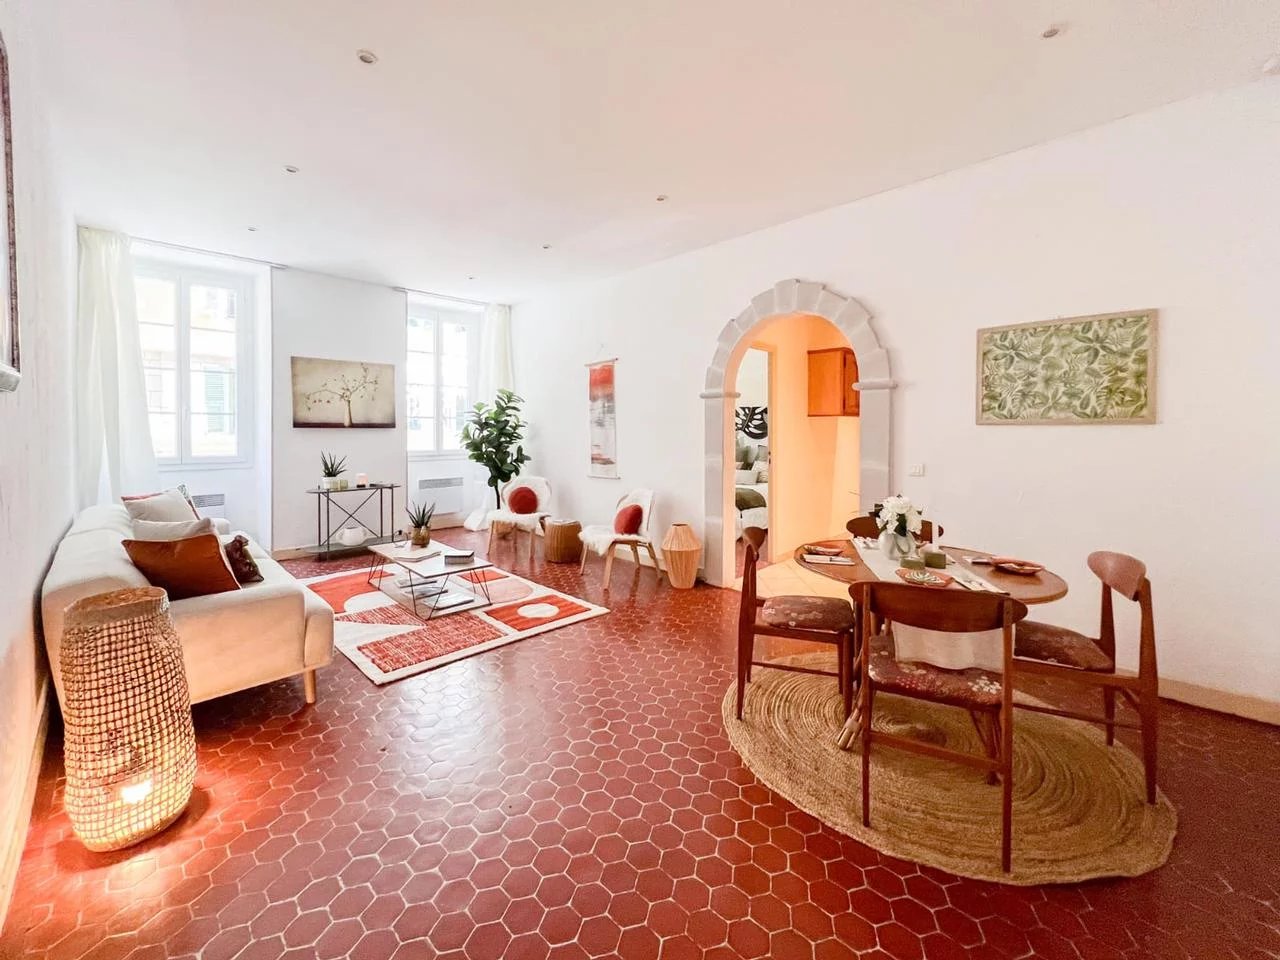 Appartement  2 Rooms 55m2  for sale   289 000 €